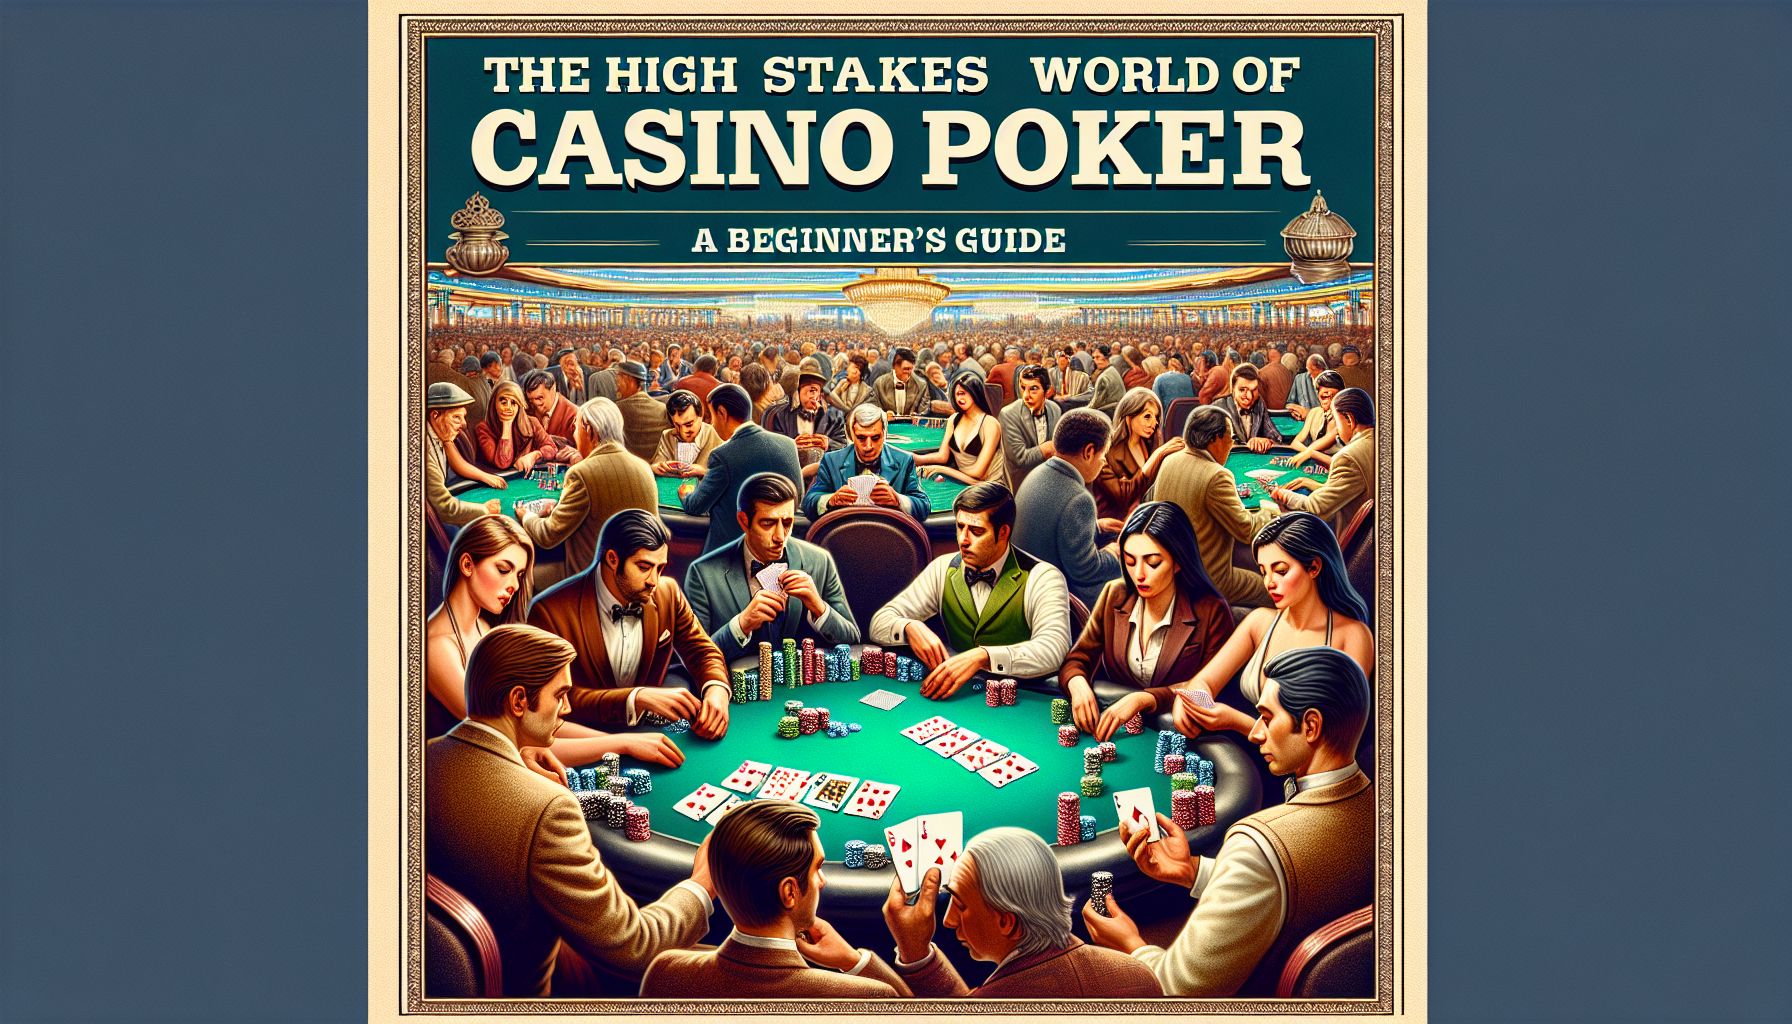 The High Stakes World of Casino Poker: A Beginner’s Guide